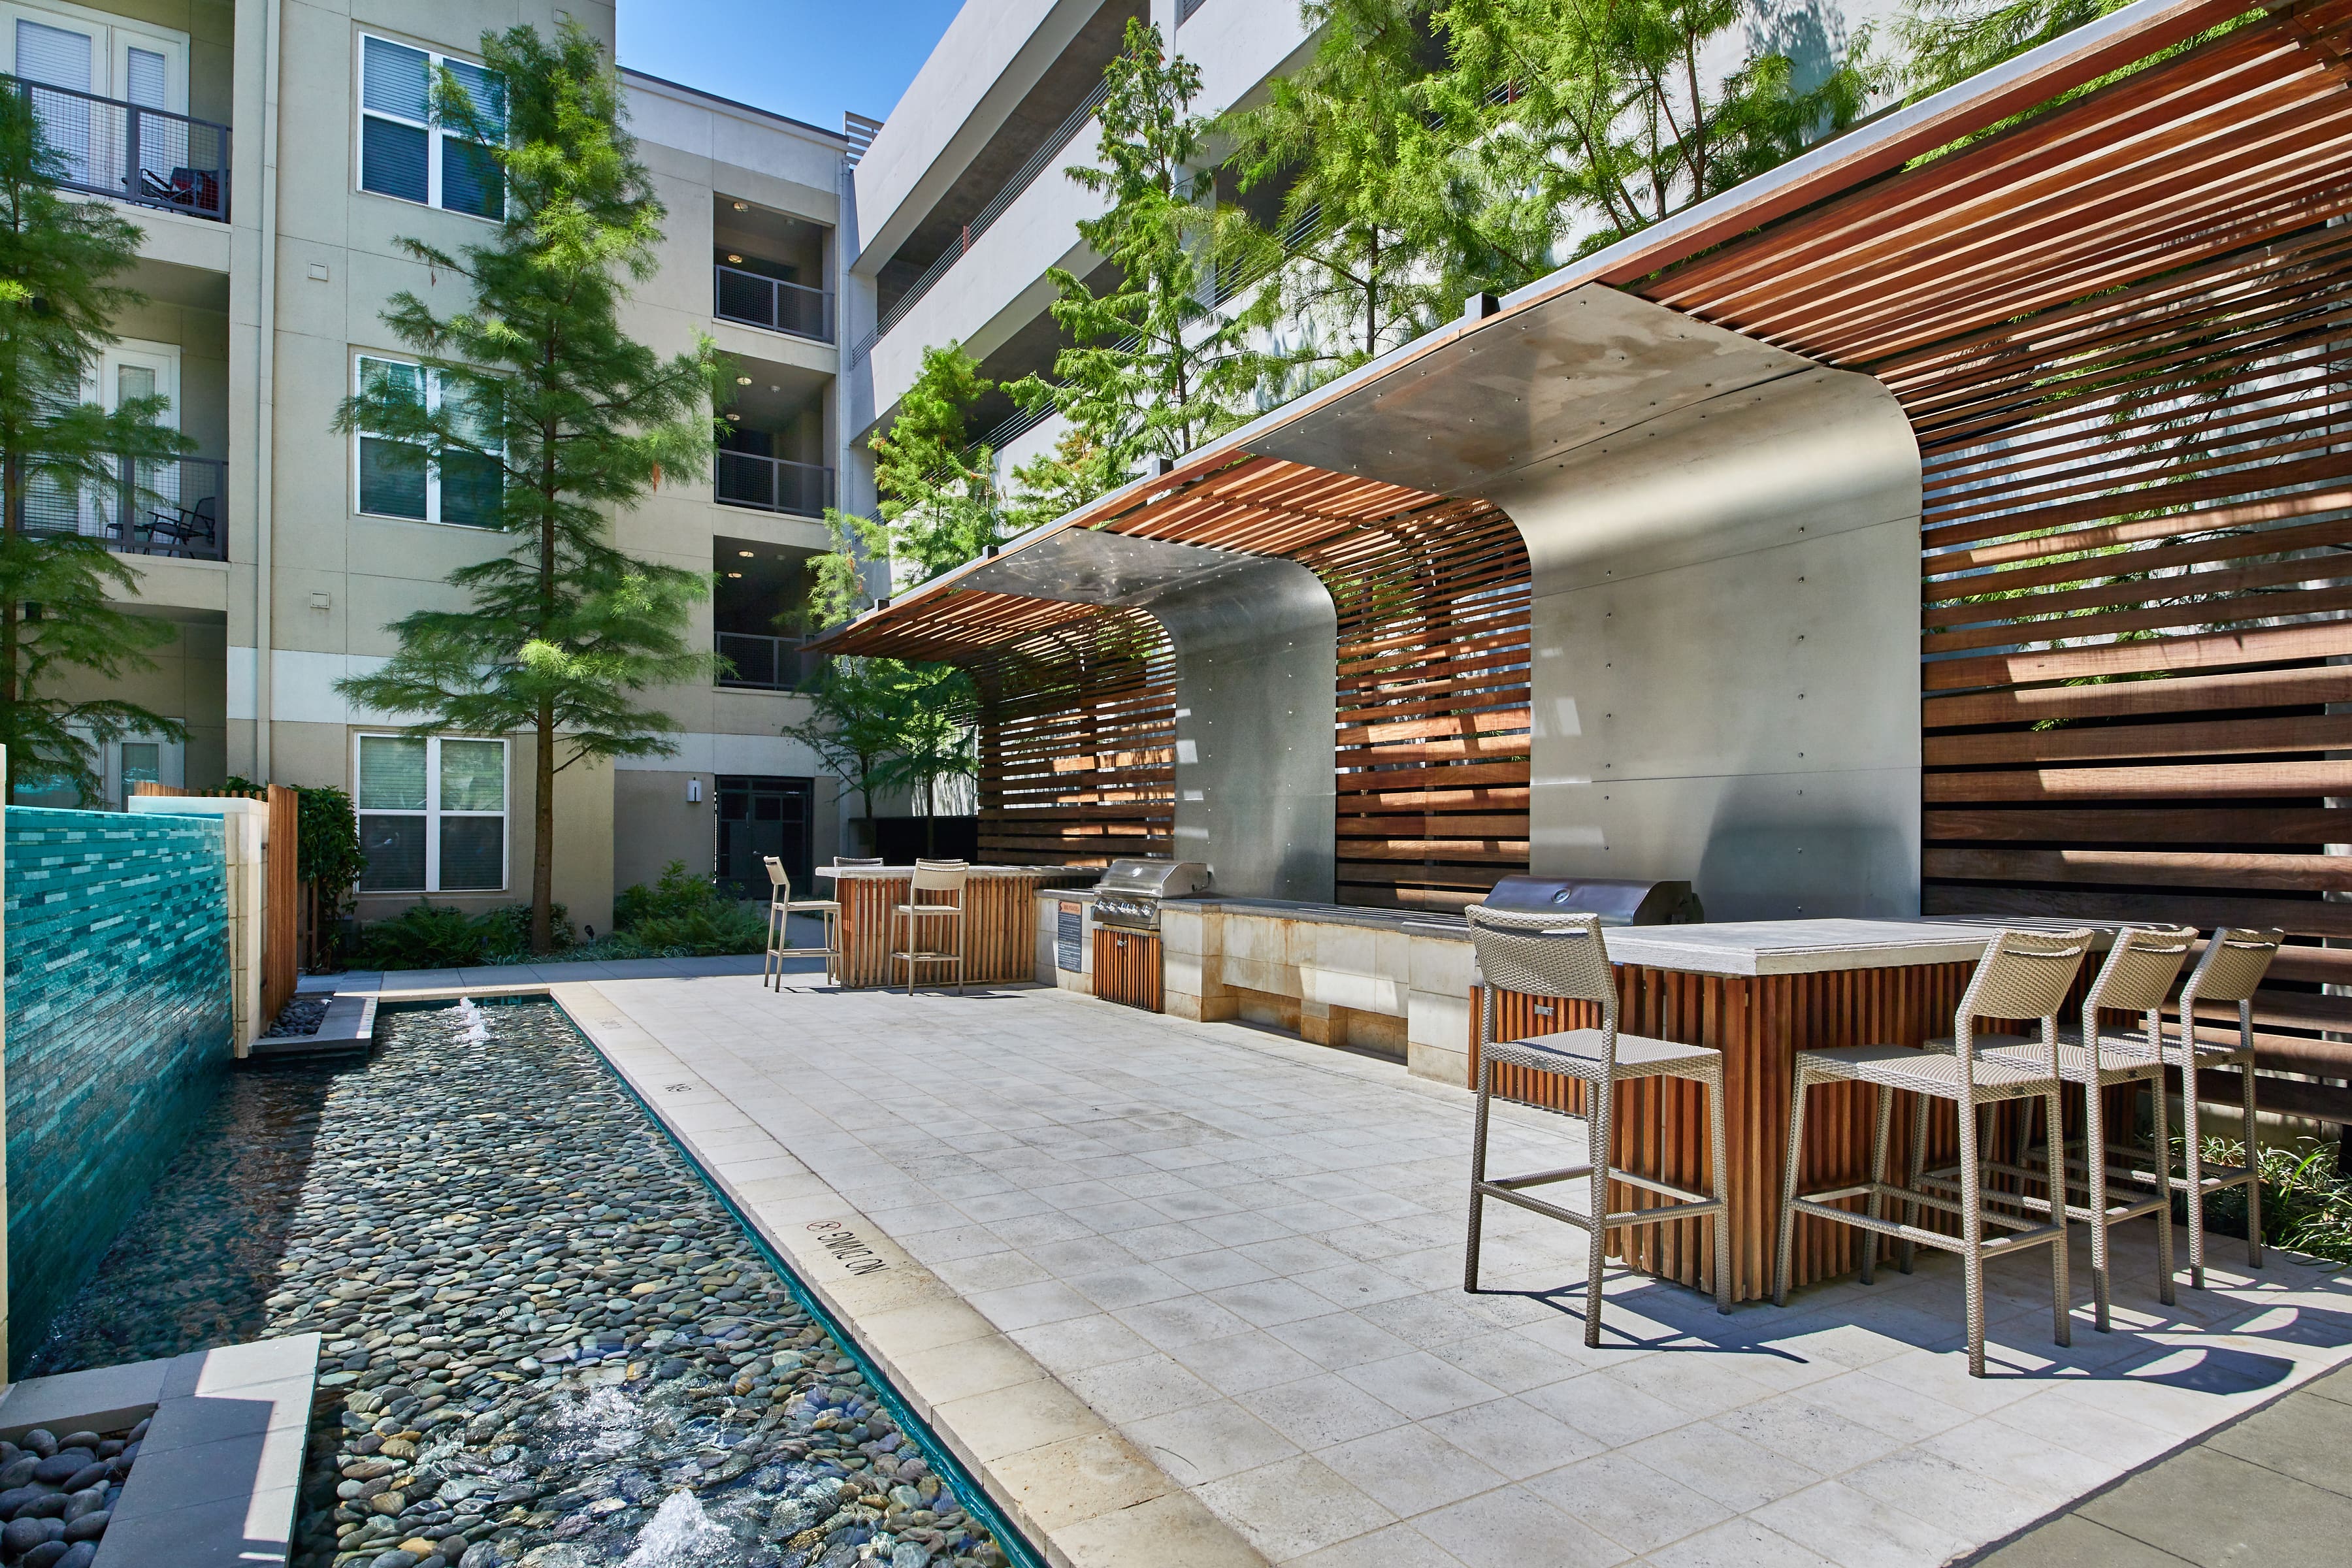 Poolside lounge area with BBQ grills and high-top seating areas